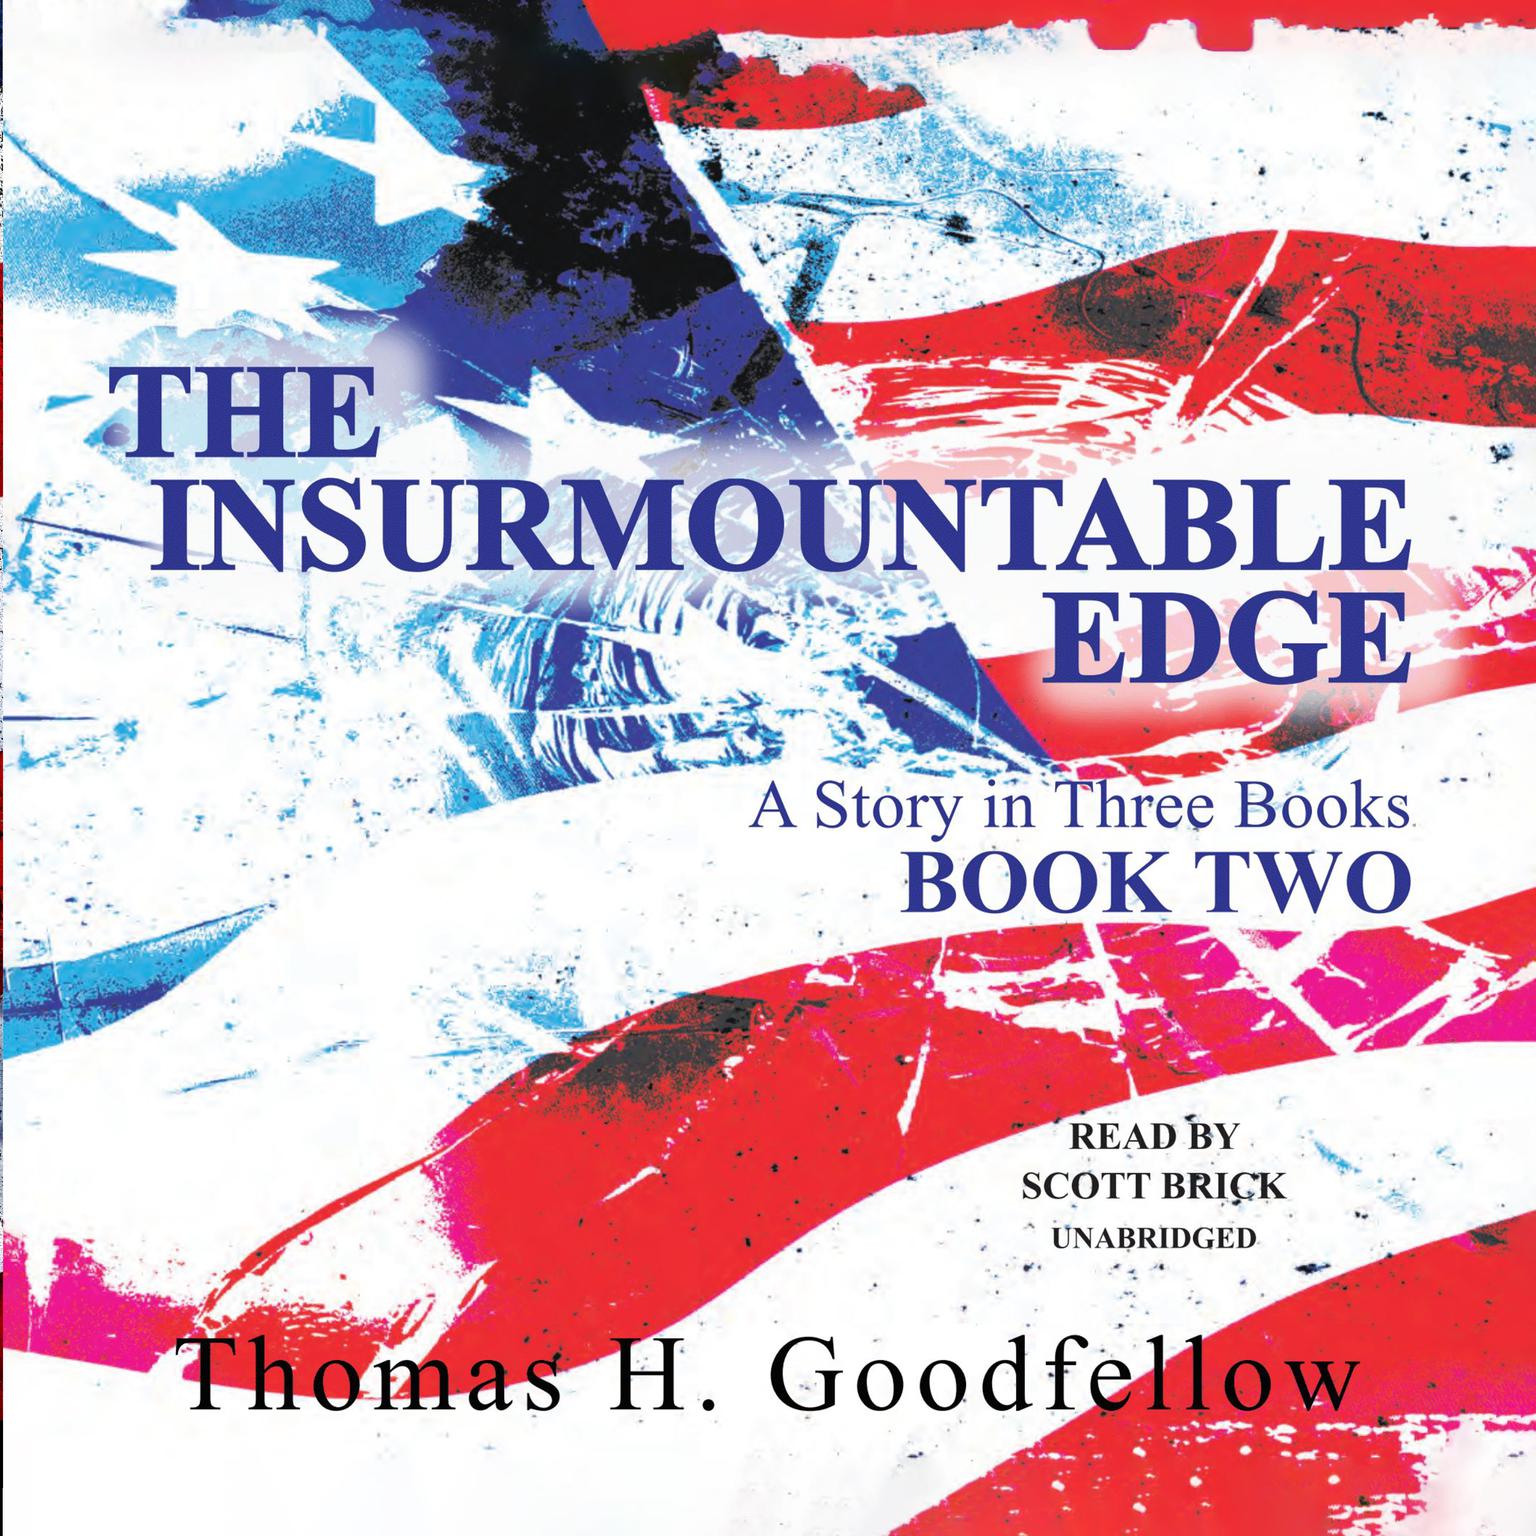 The Insurmountable Edge: Book Two: A Story in Three Books Audiobook, by Thomas H. Goodfellow